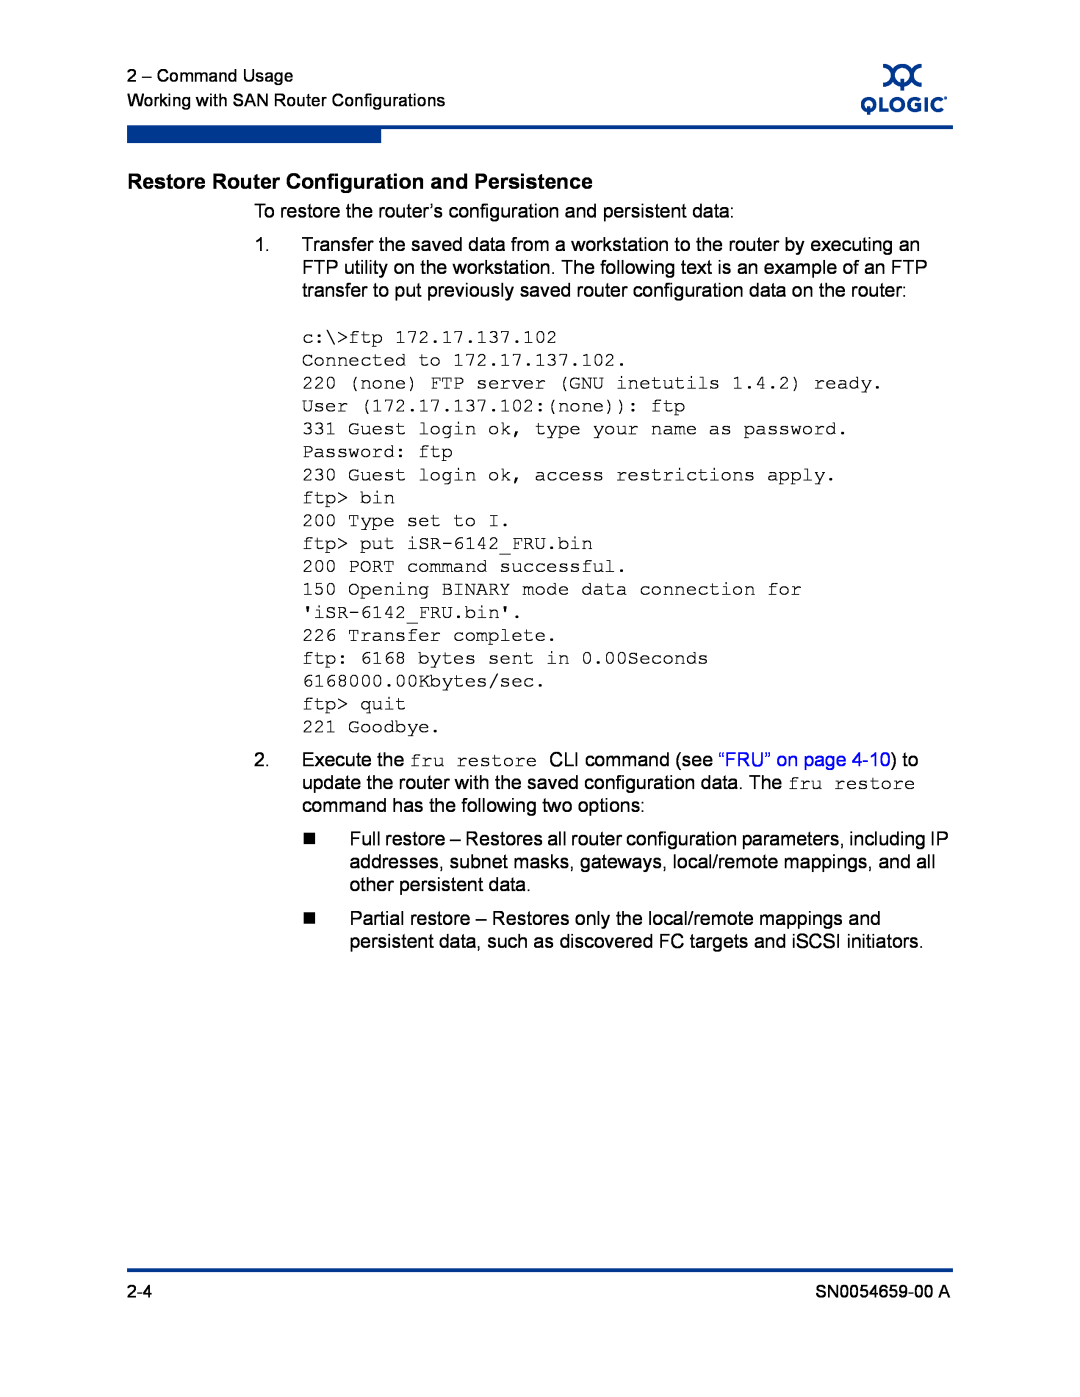 Q-Logic ISR6142 manual Restore Router Configuration and Persistence 